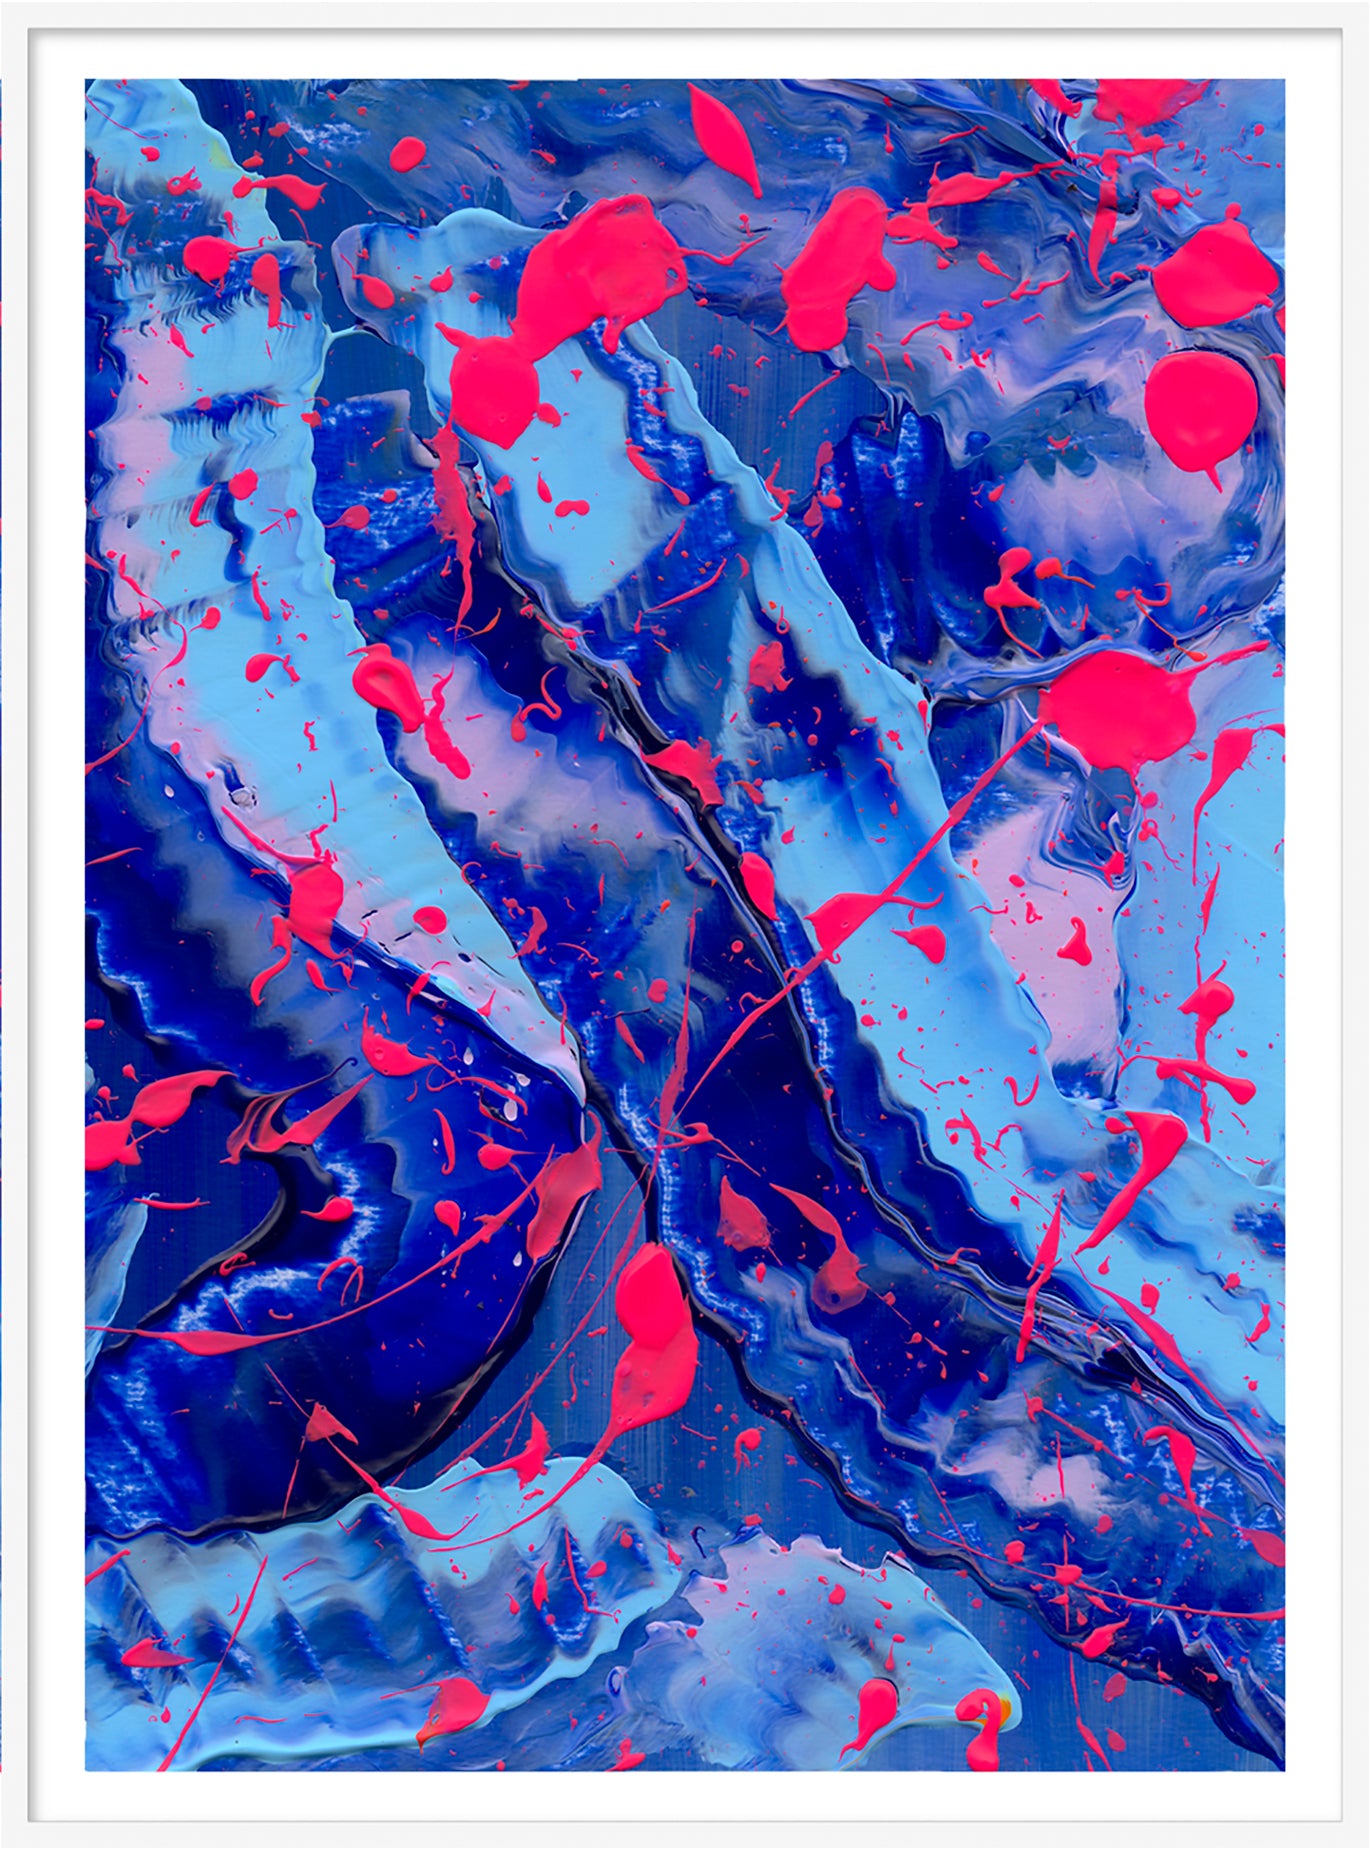 Blue III, blues and neon pinks abstract wall art print on paper white frame. After original art by Bridget Bradley